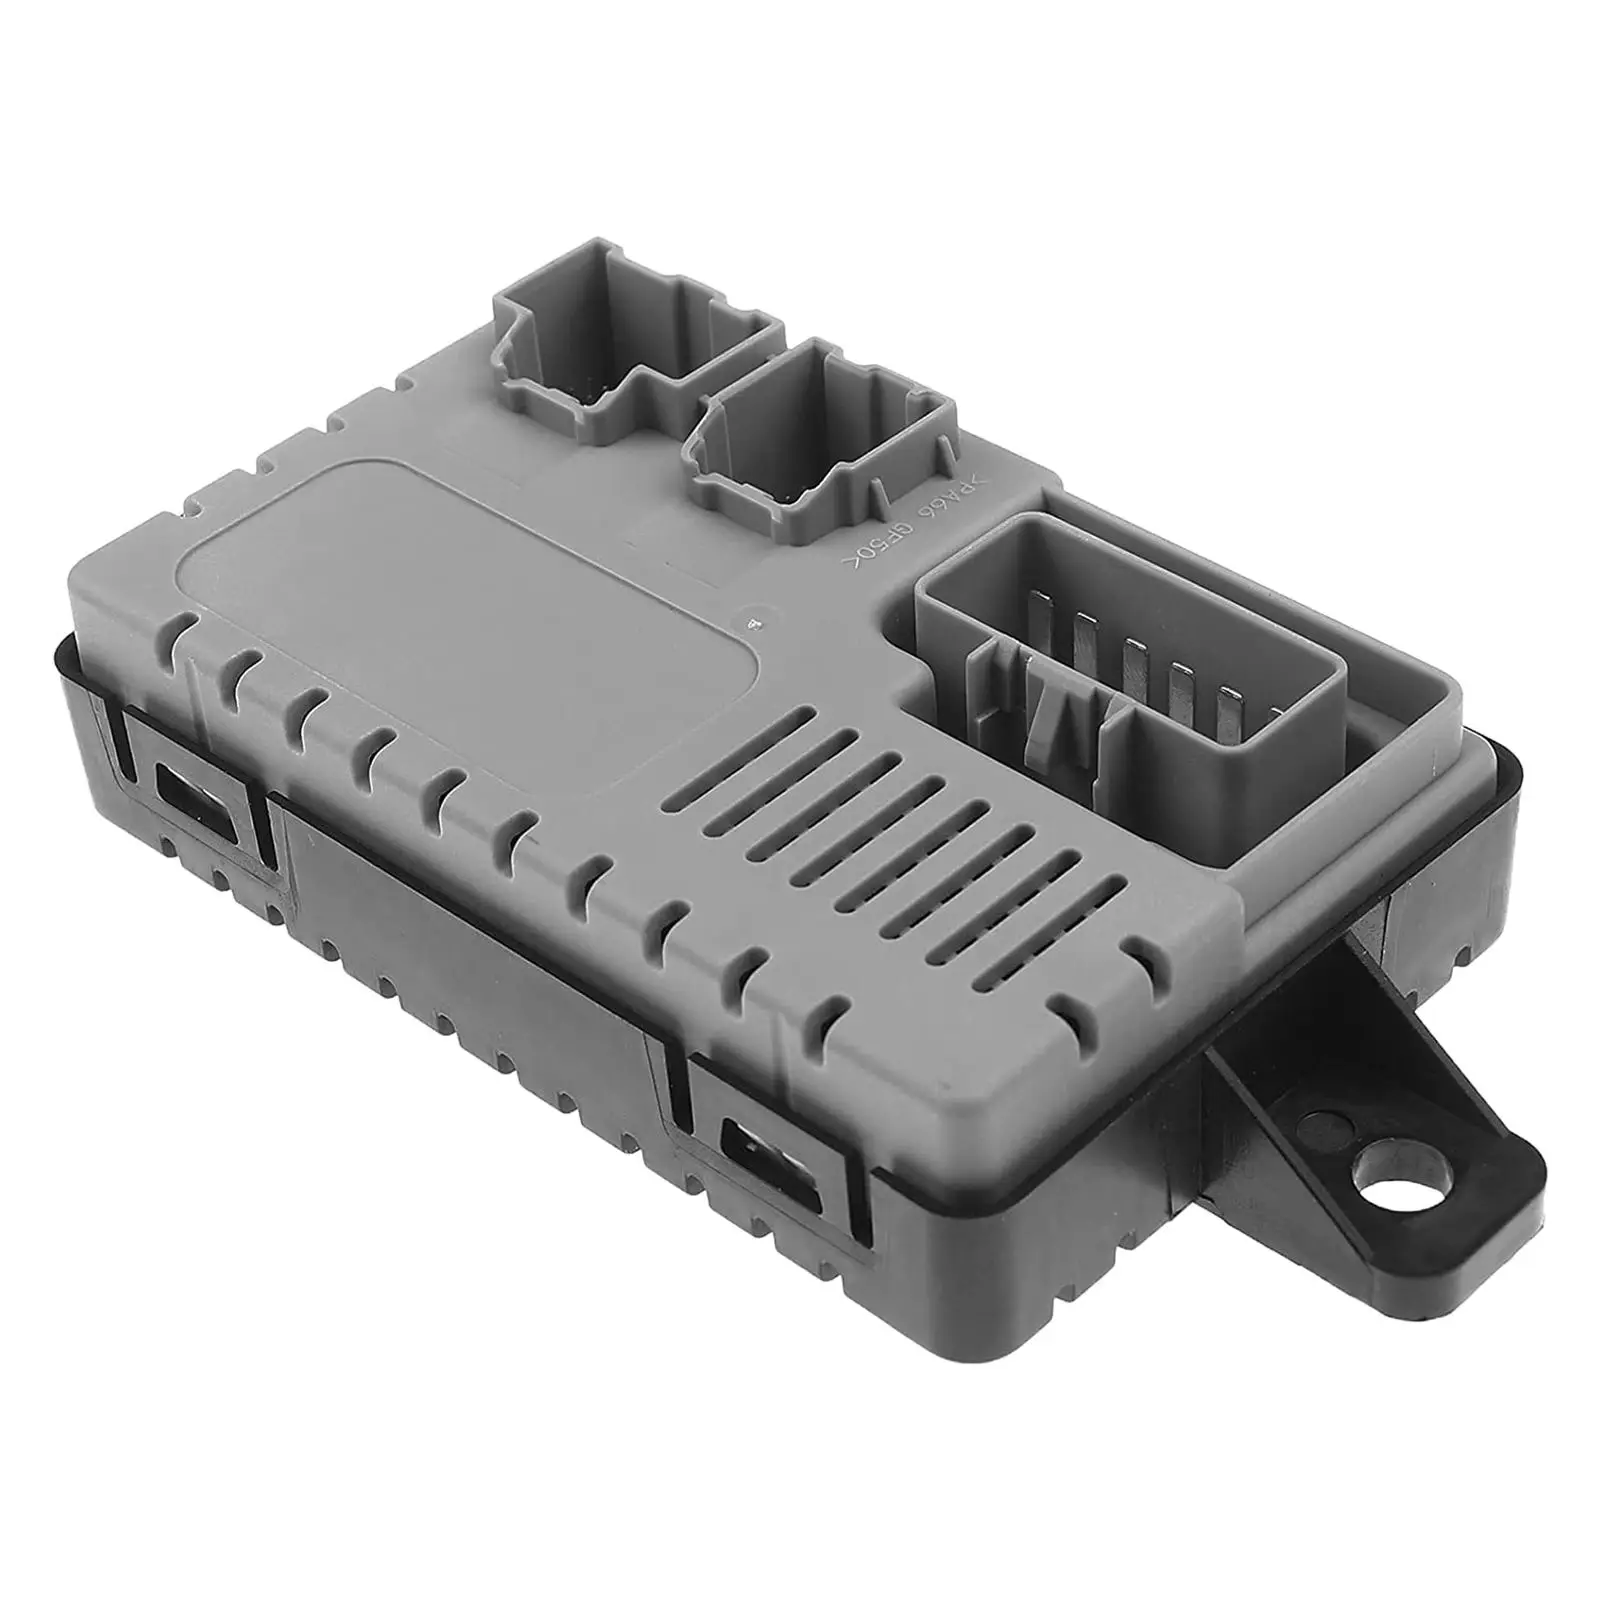 passenage Side Seat Control Module for Ford F150, F250, F350 Super Duty Replaces High Reliability Spare Parts